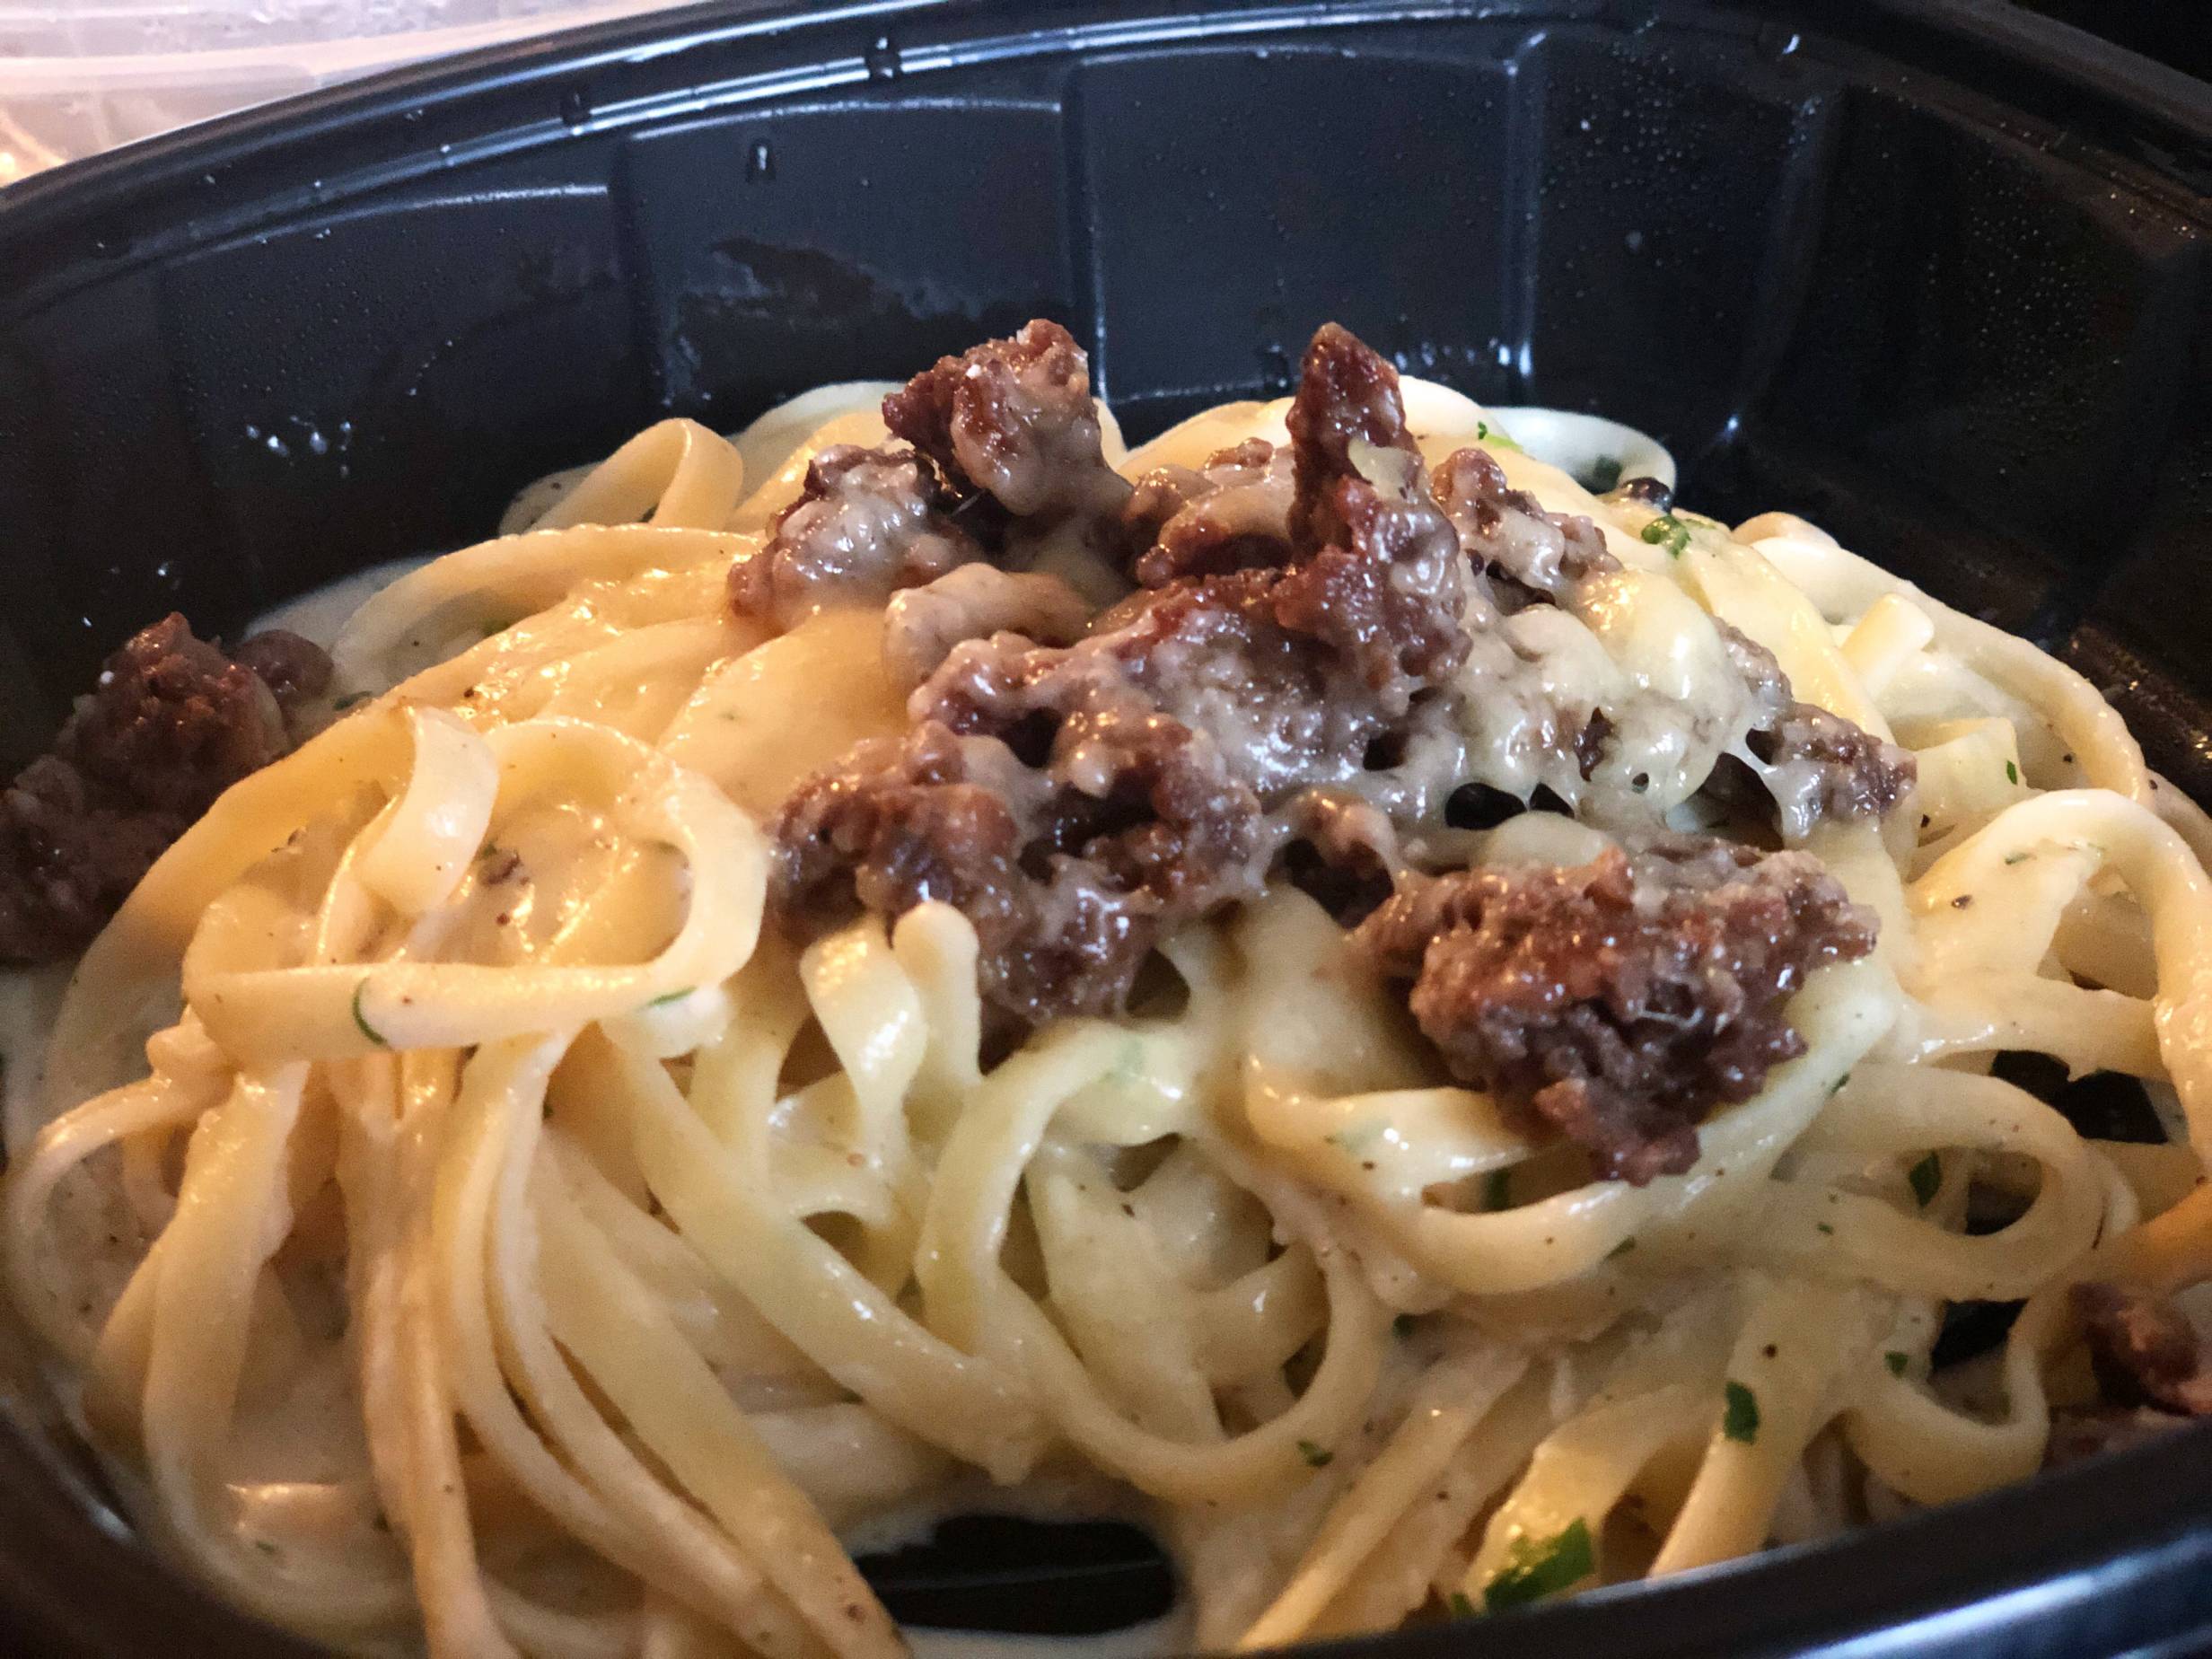 A creamy linguine dish is in a black plastic to go container. The pasta is topped with a dark meat of bulgogi beef. Photo by Alyssa Buckley.